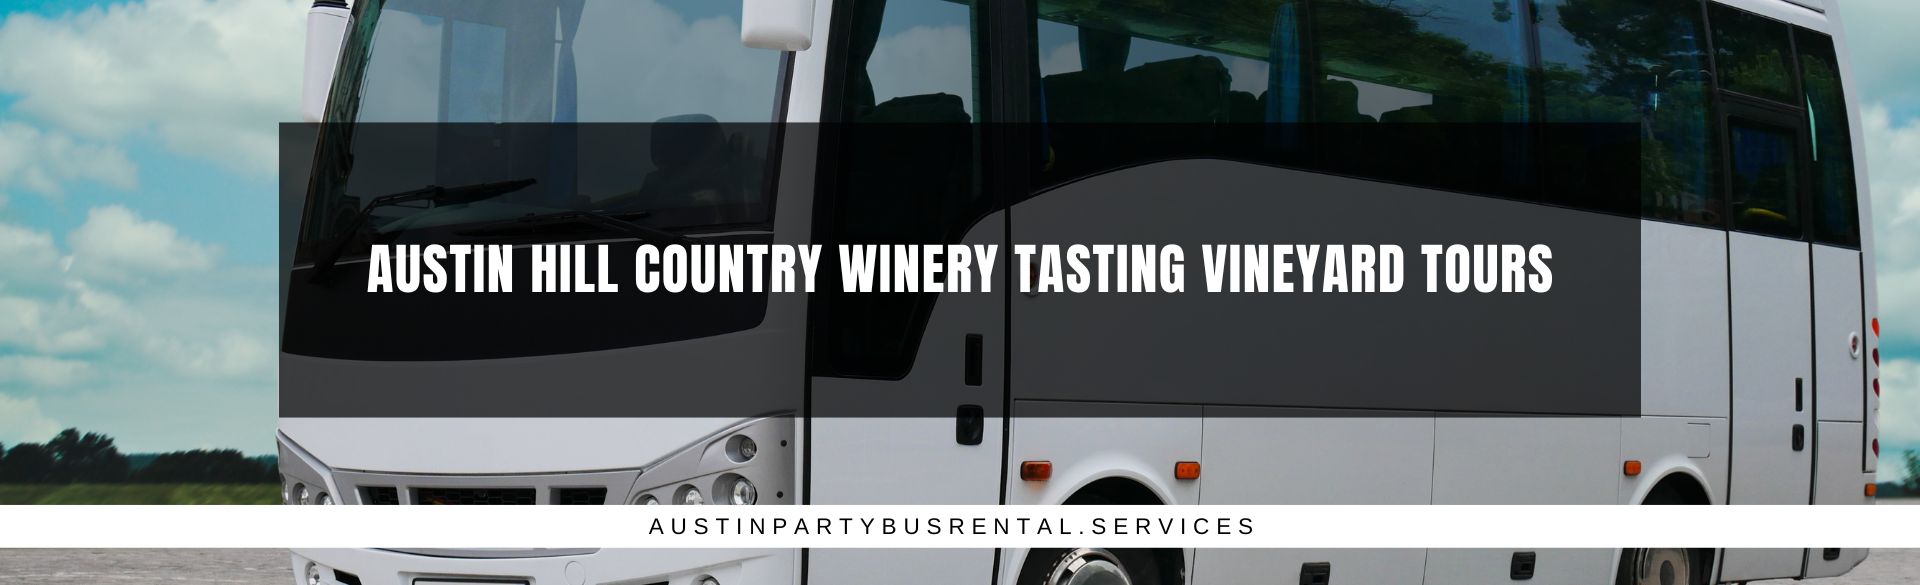 Austin Hill Country Winery Tasting Vineyard Tours